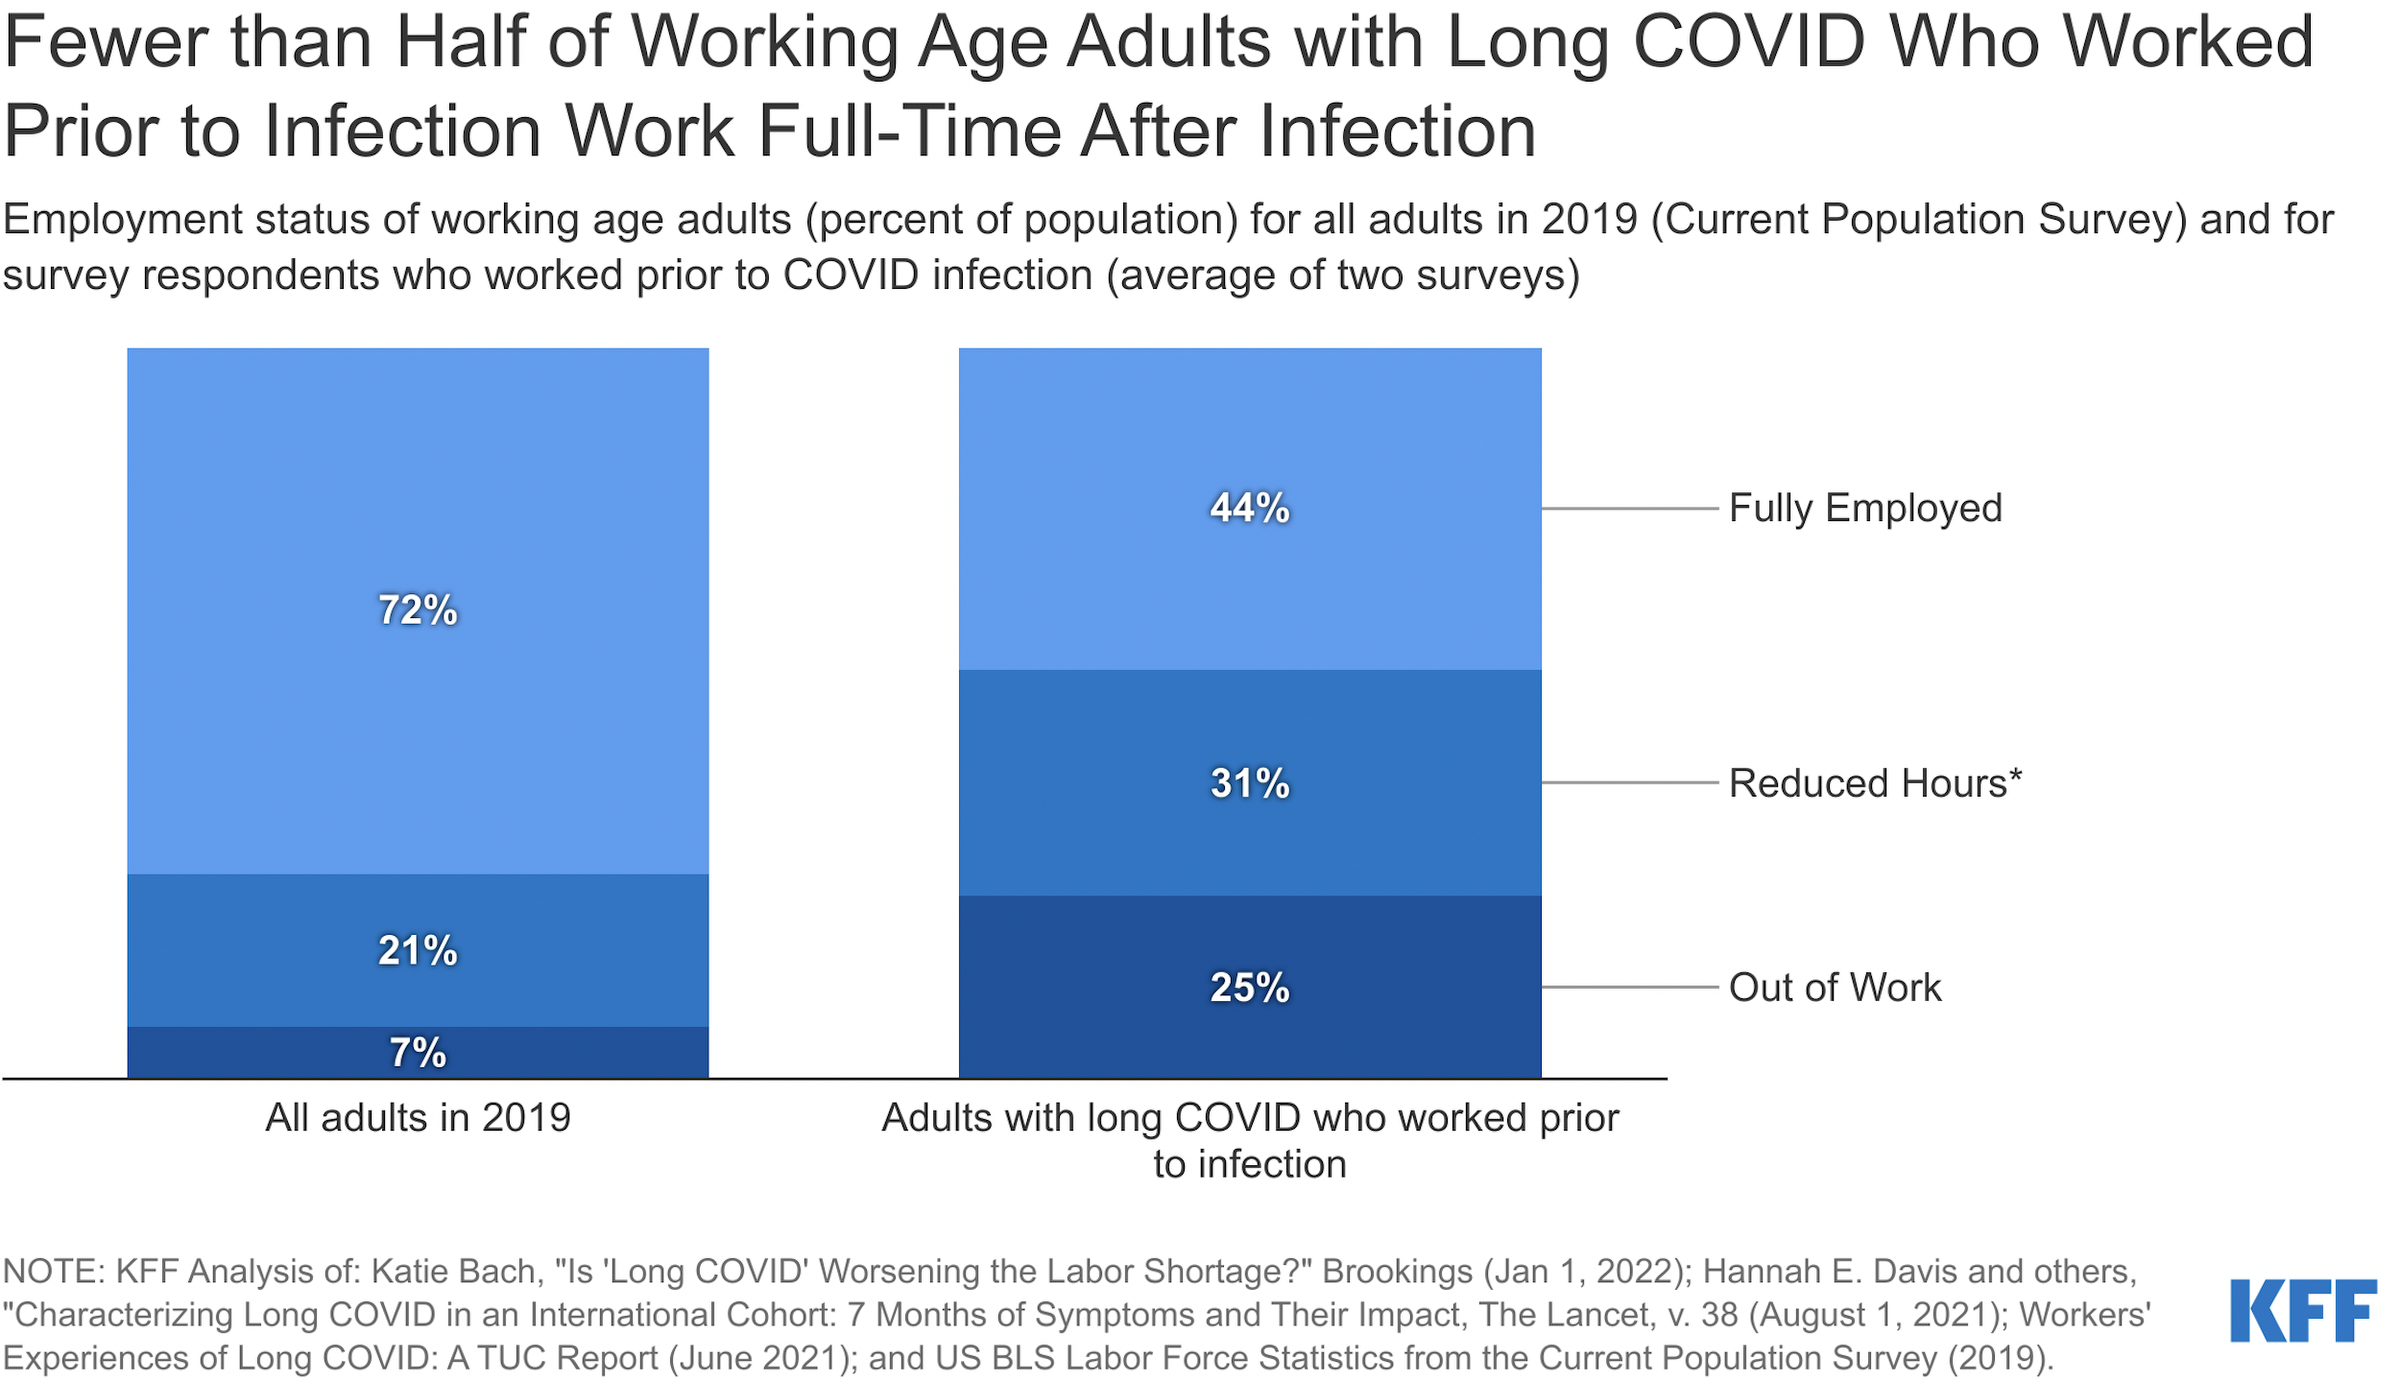 A graph shows that fewer than half of working age adults with long COVID who worked before infection work full-time after infection